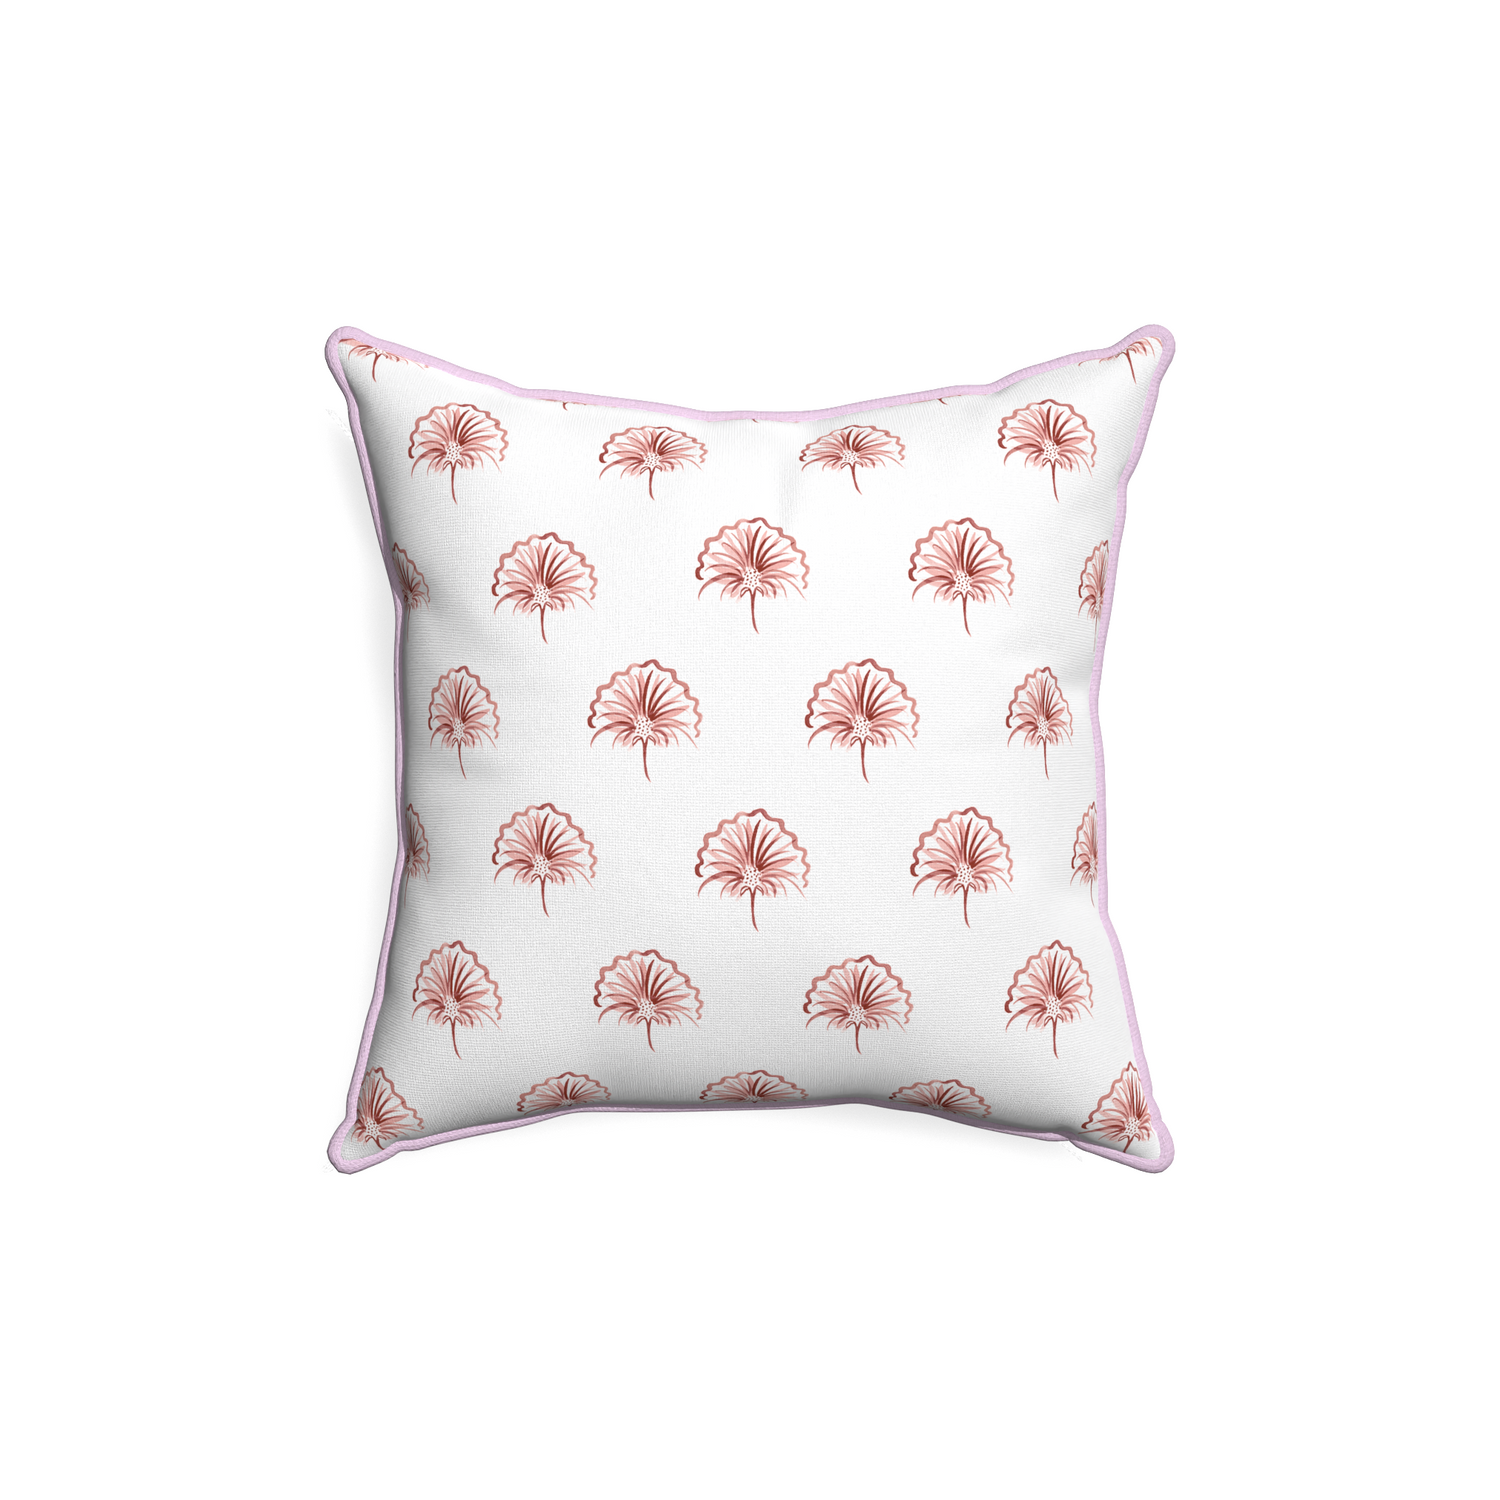 18-square penelope rose custom floral pinkpillow with l piping on white background